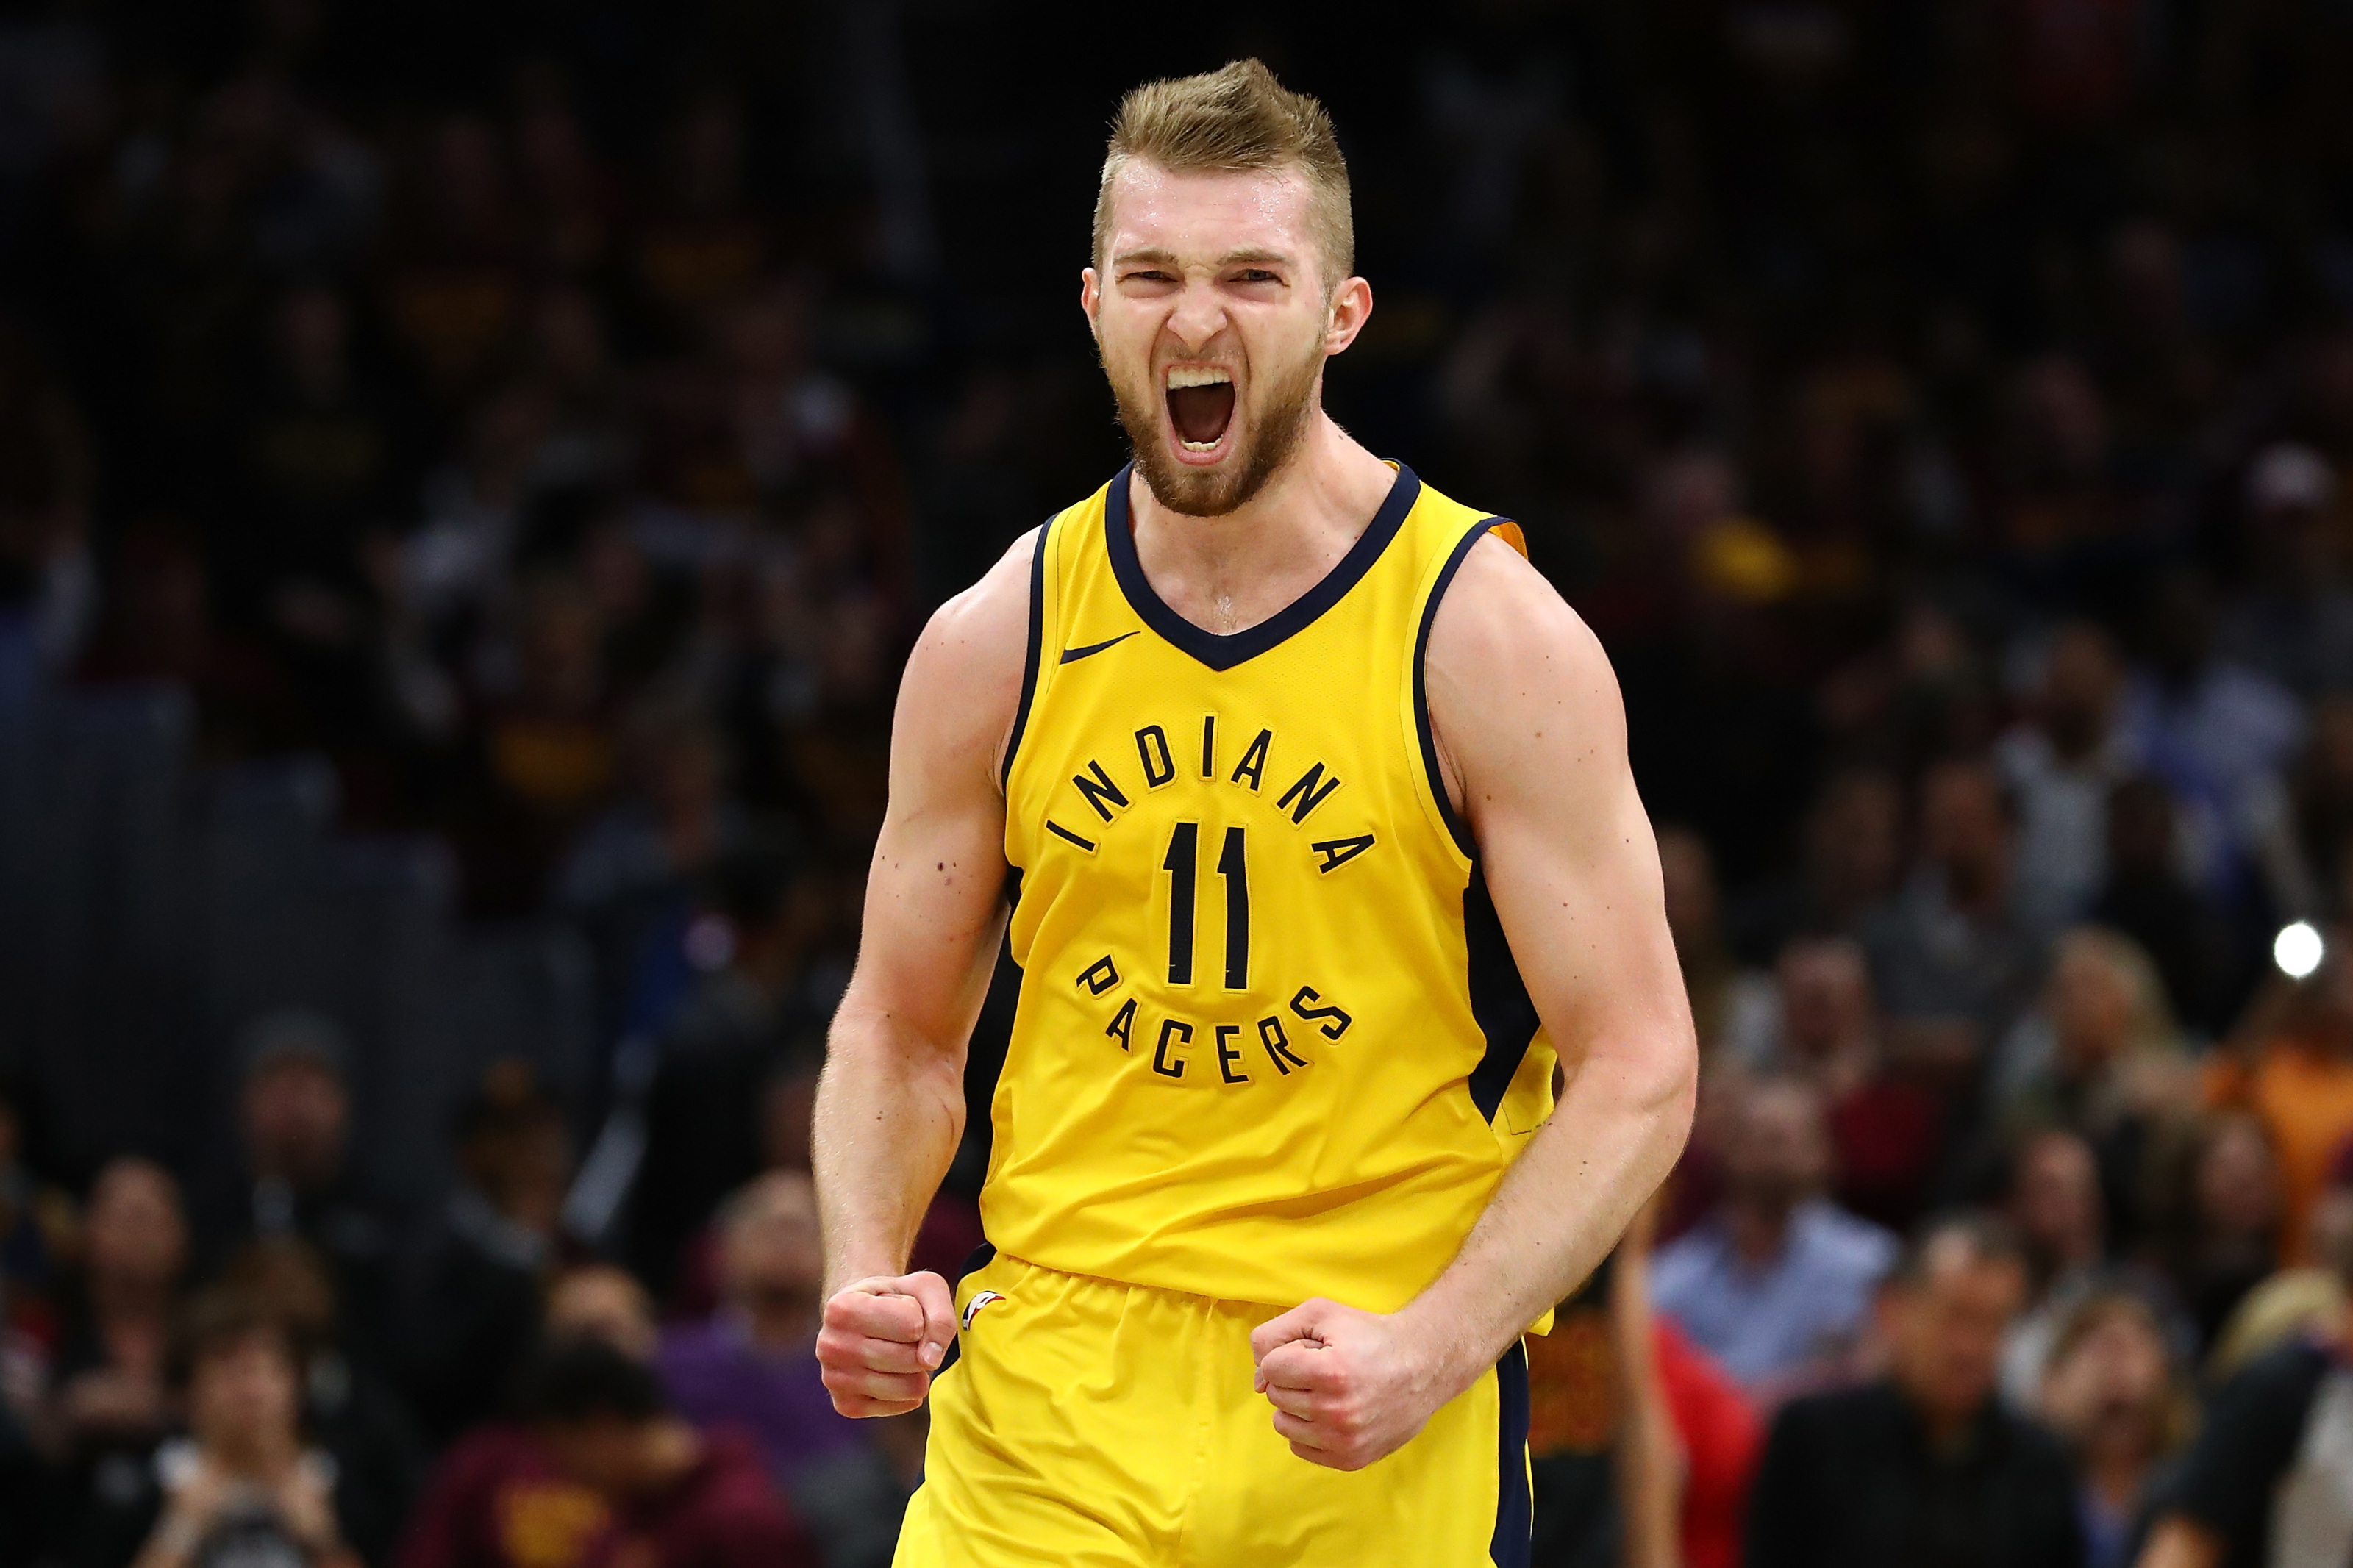 Indiana Pacers Profile: The underrated dominance of Domantas Sabonis